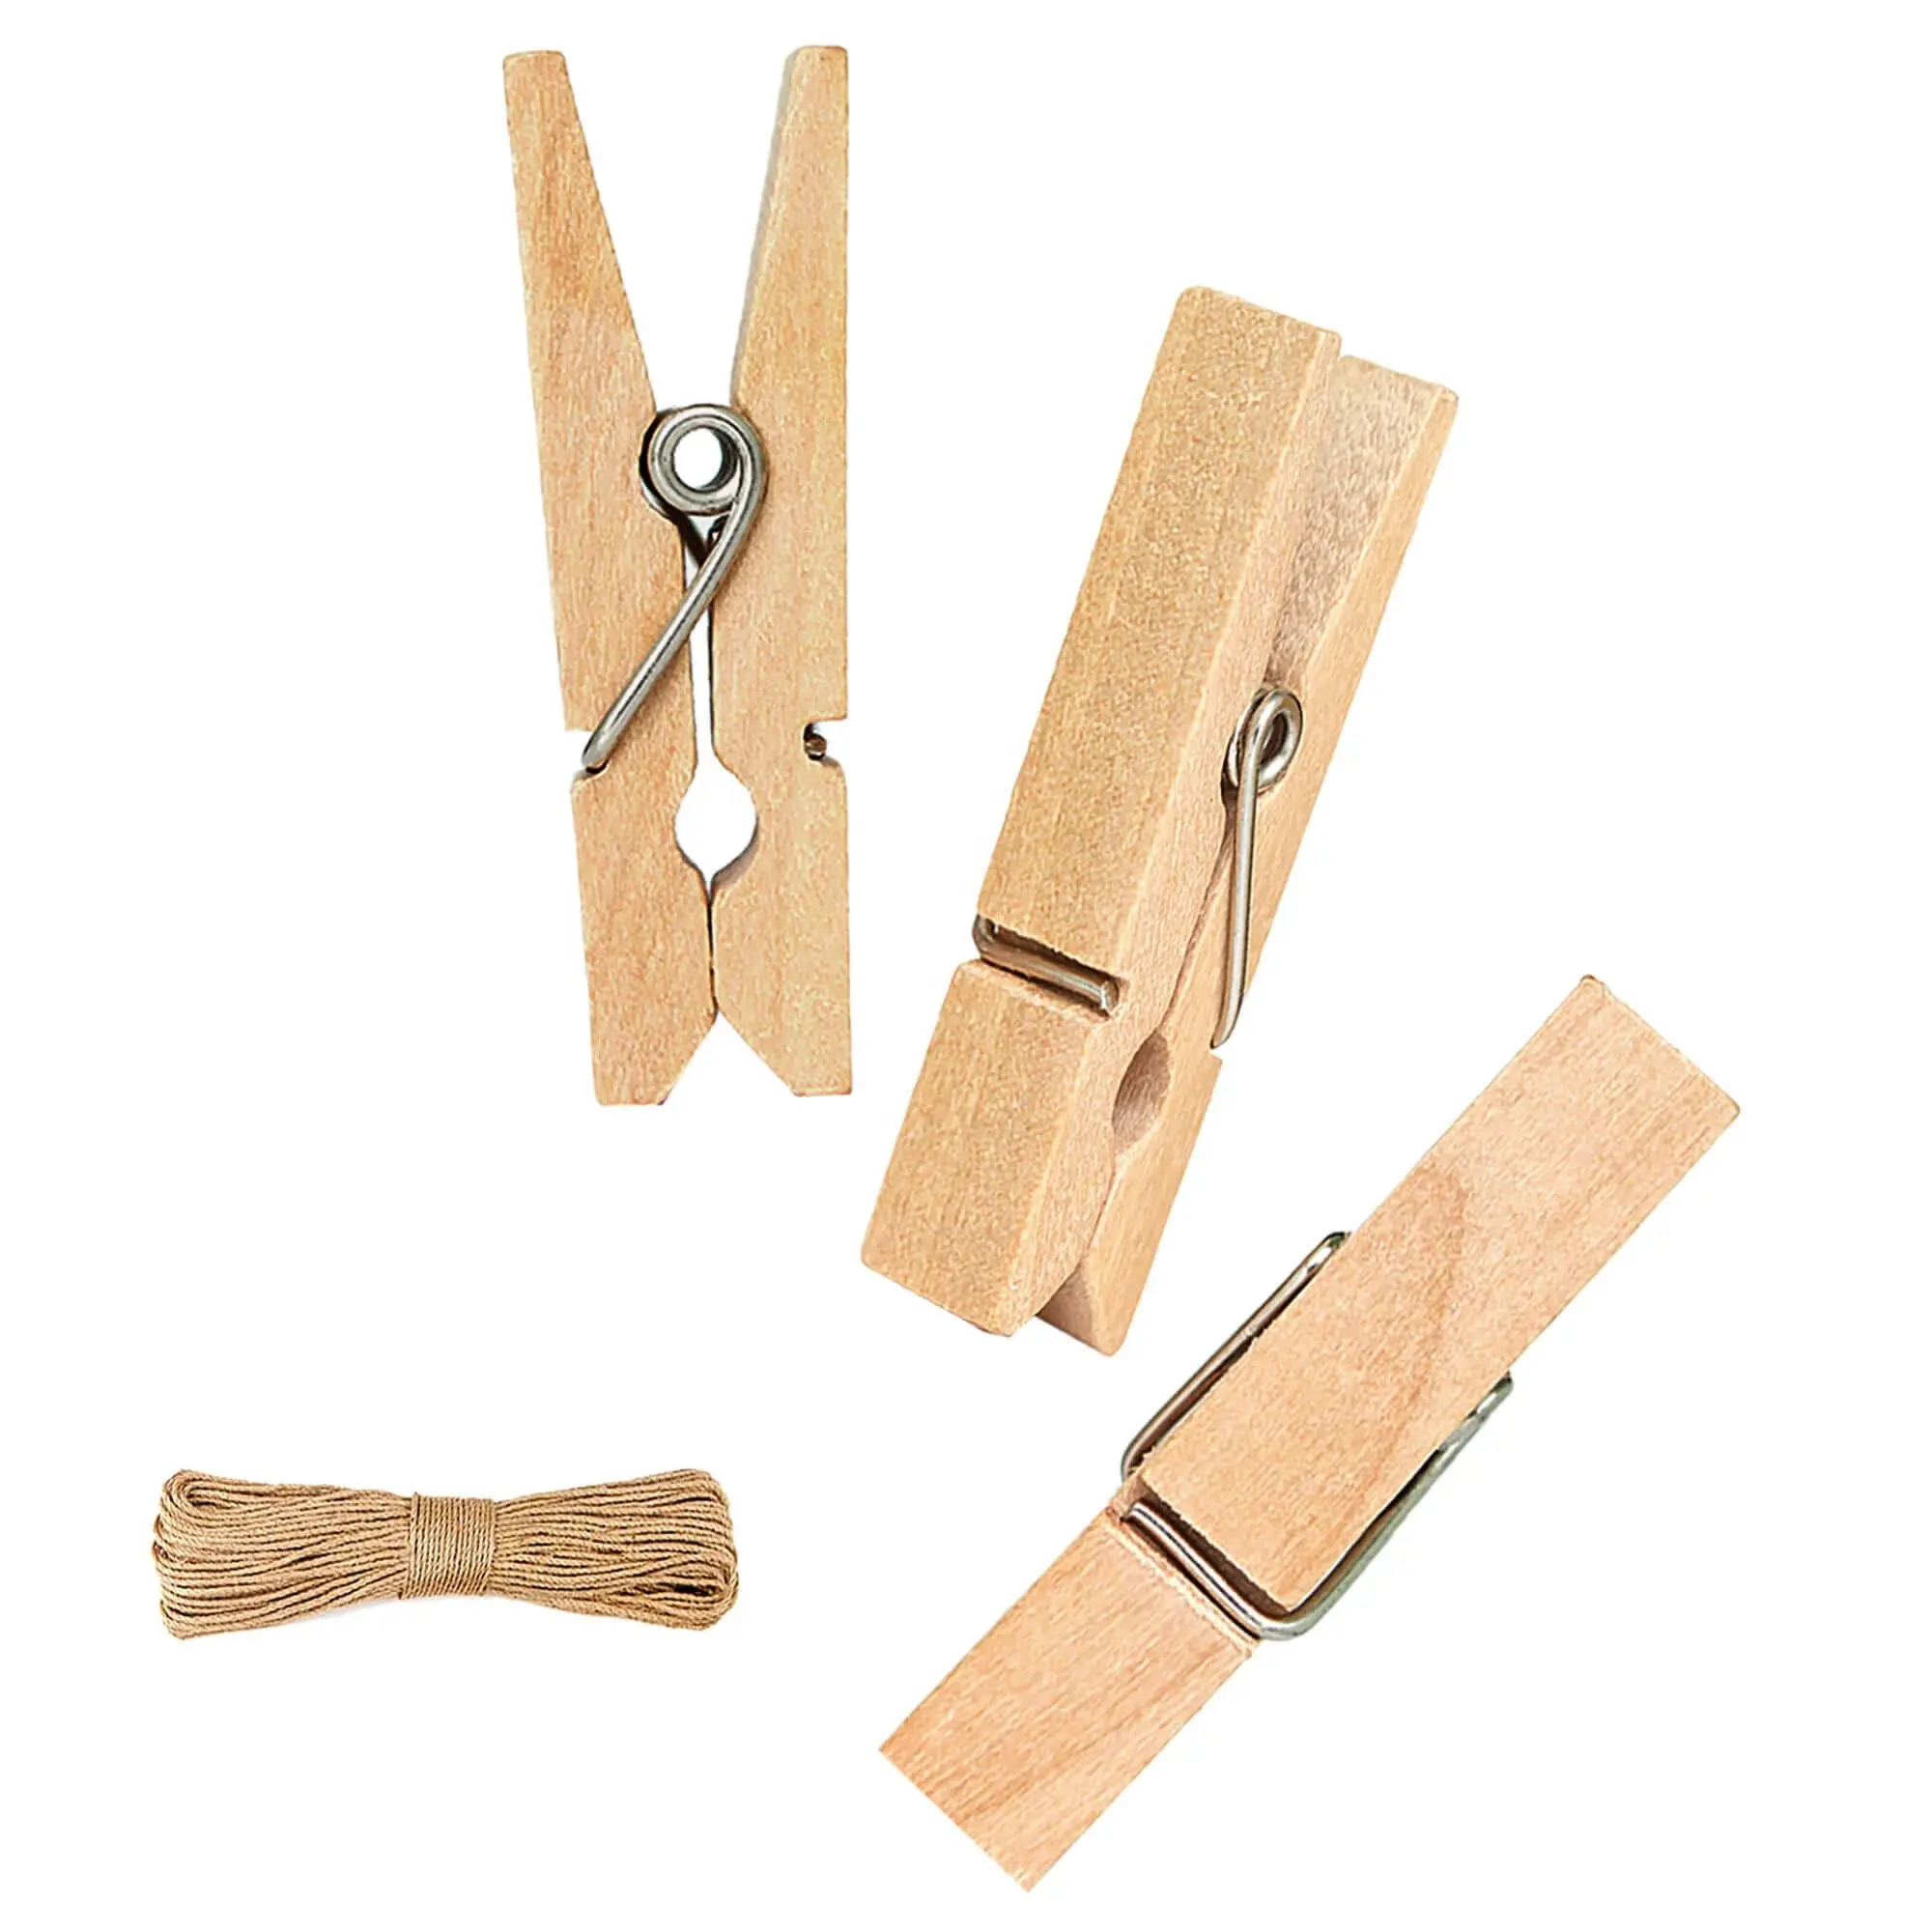 Mini Clothespins Wooden Small Clothes Pin Jute Twine String Photos Clips Pictures Crafts Display Decorative Clothespin